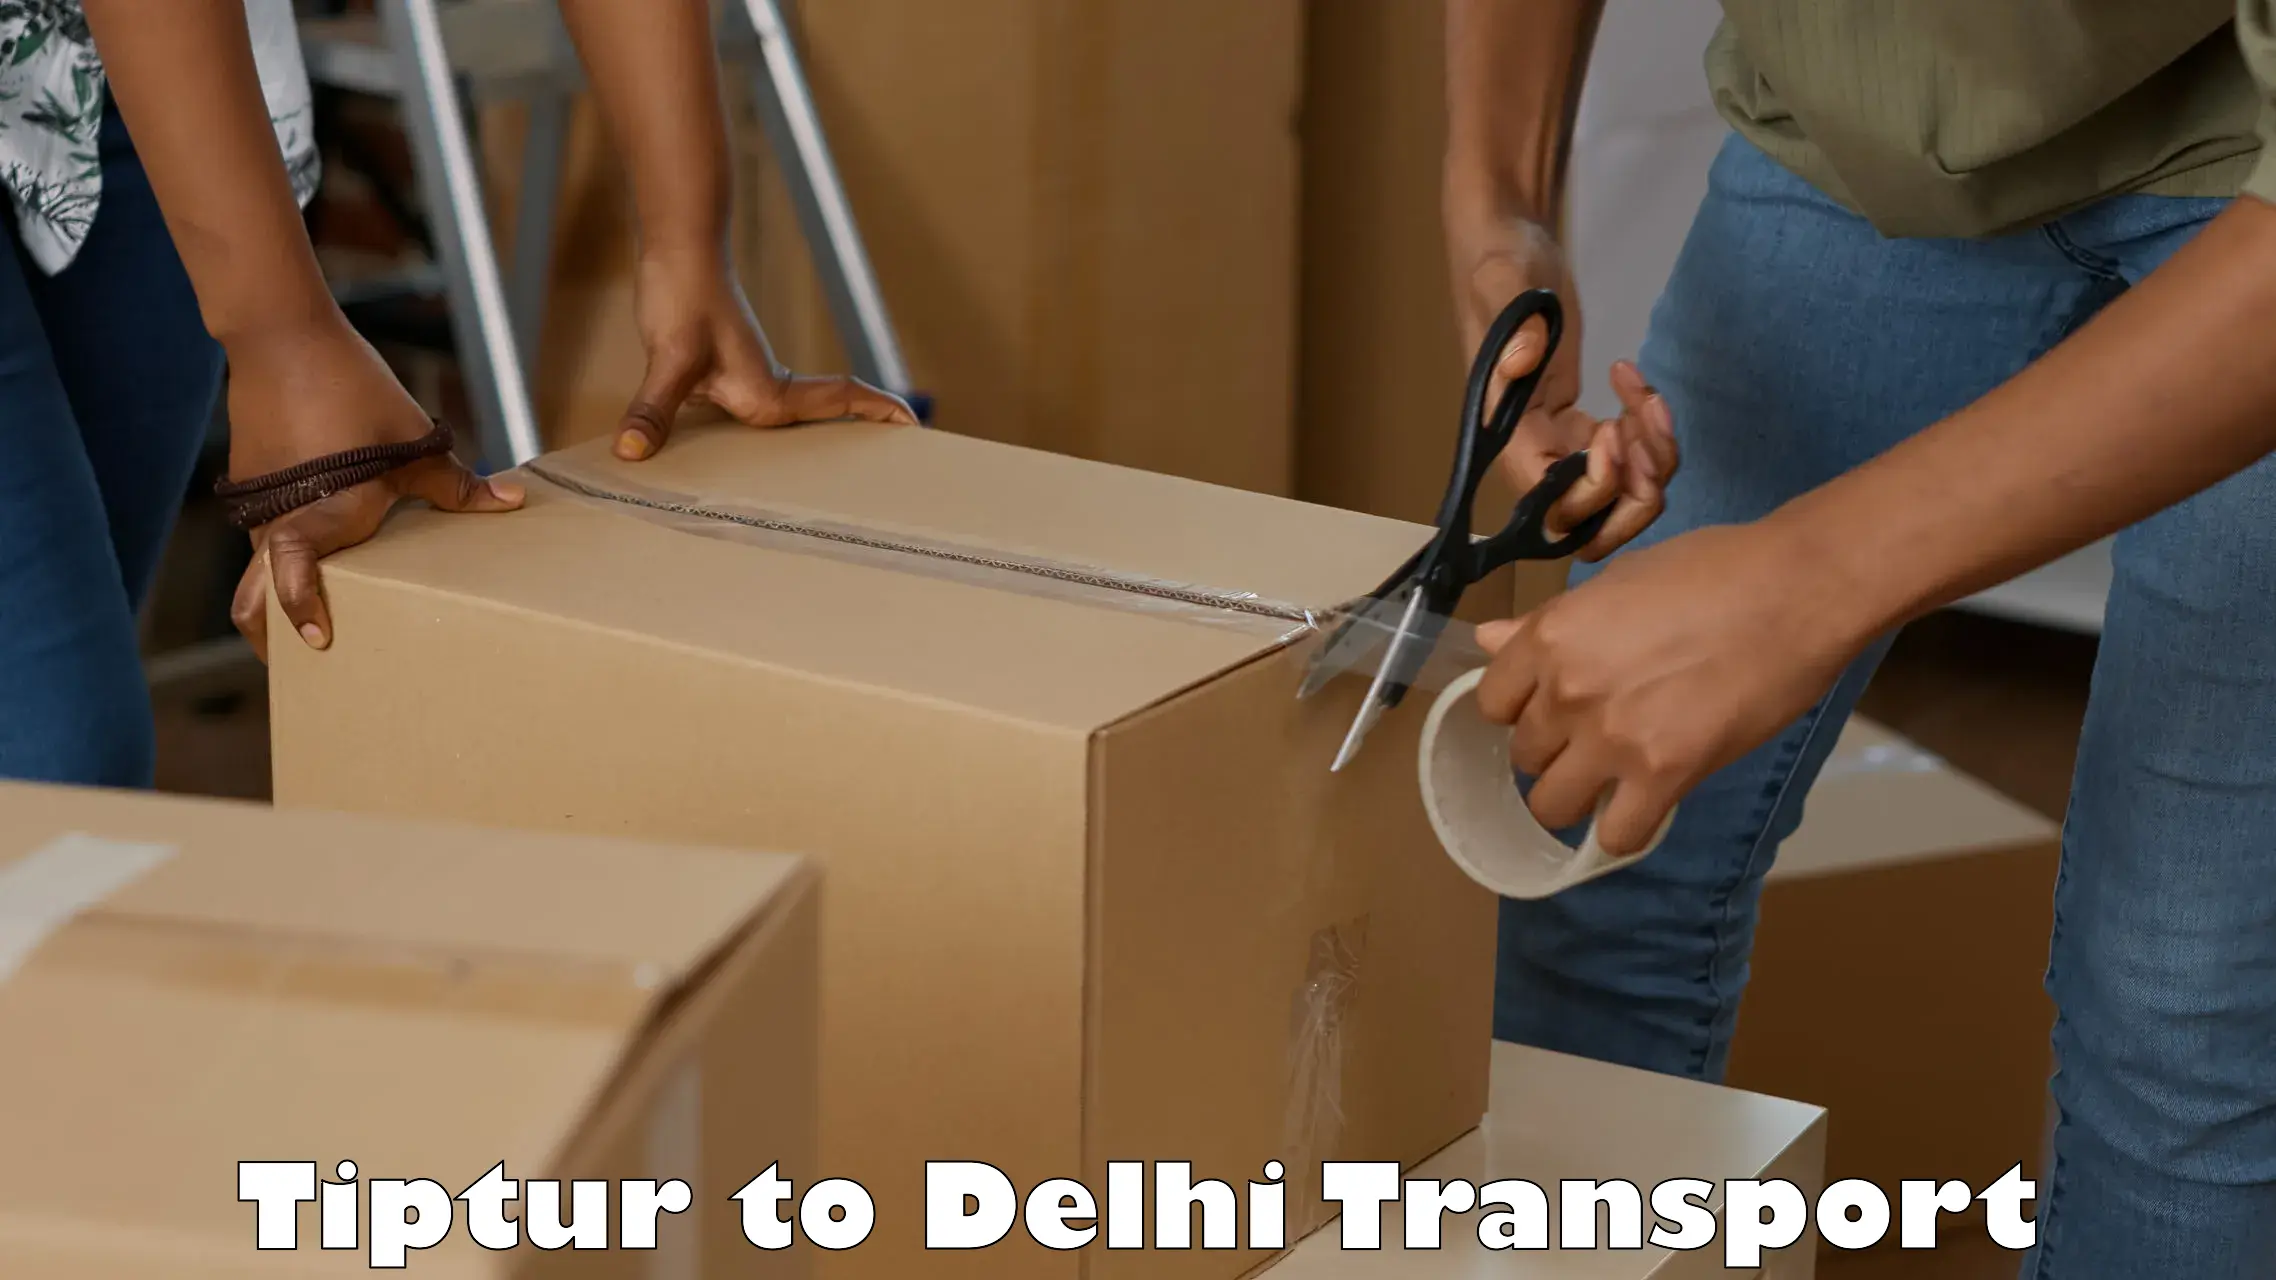 Transport bike from one state to another Tiptur to NCR